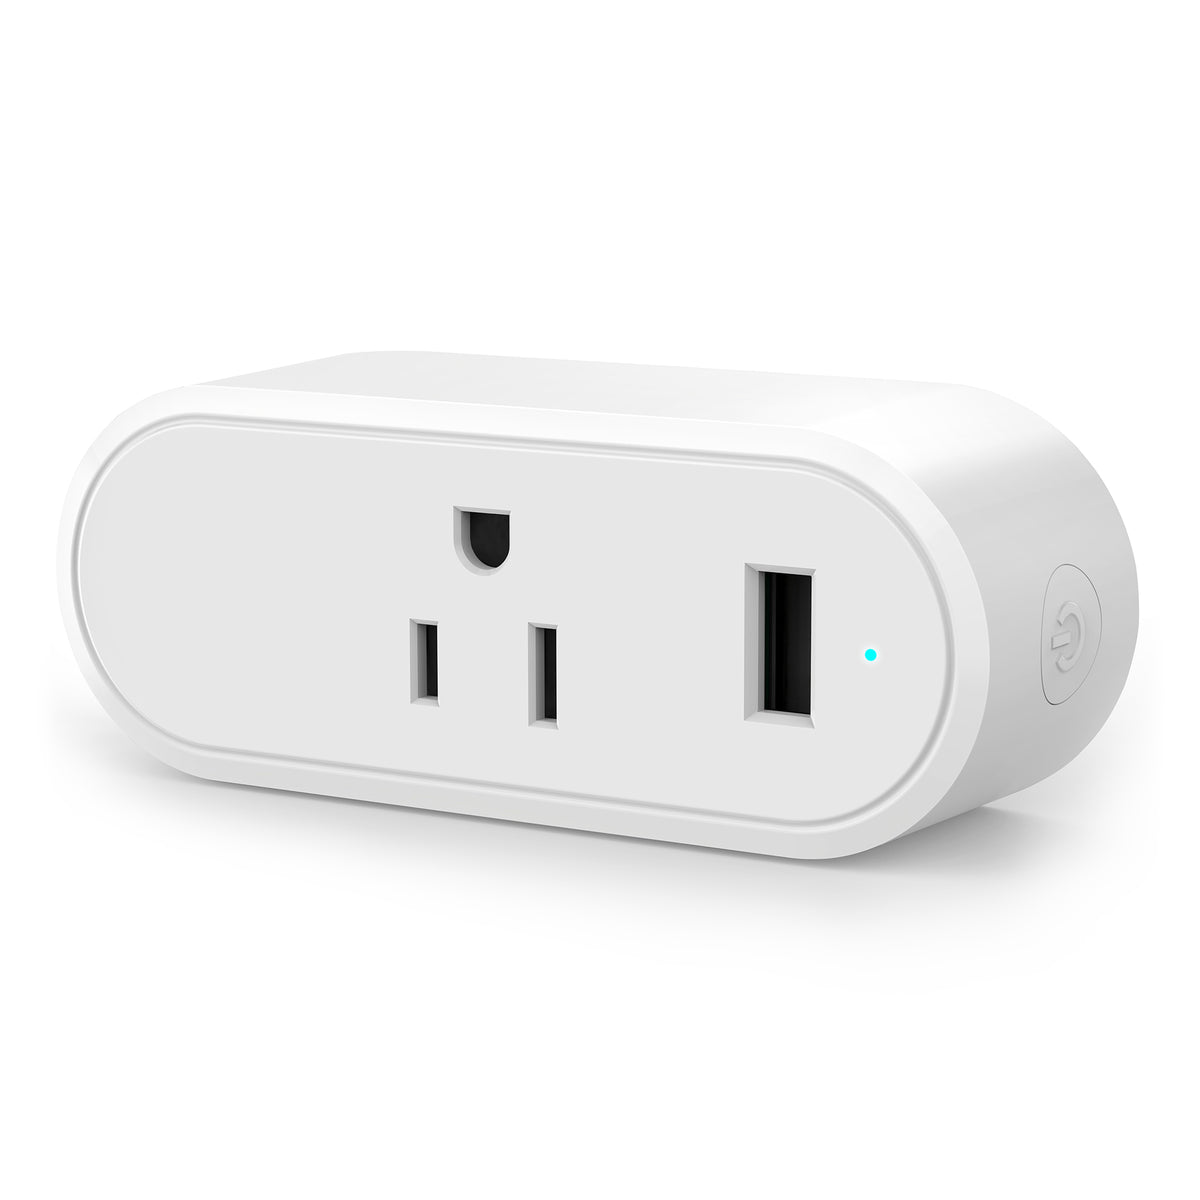 Aoycocr Bluetooth WiFi Smart Plug - Smart Outlets Work with Alexa, Google  Home Assistant, Remote Control Plugs with Timer Function, ETL/FCC/Rohs  Listed Socket 